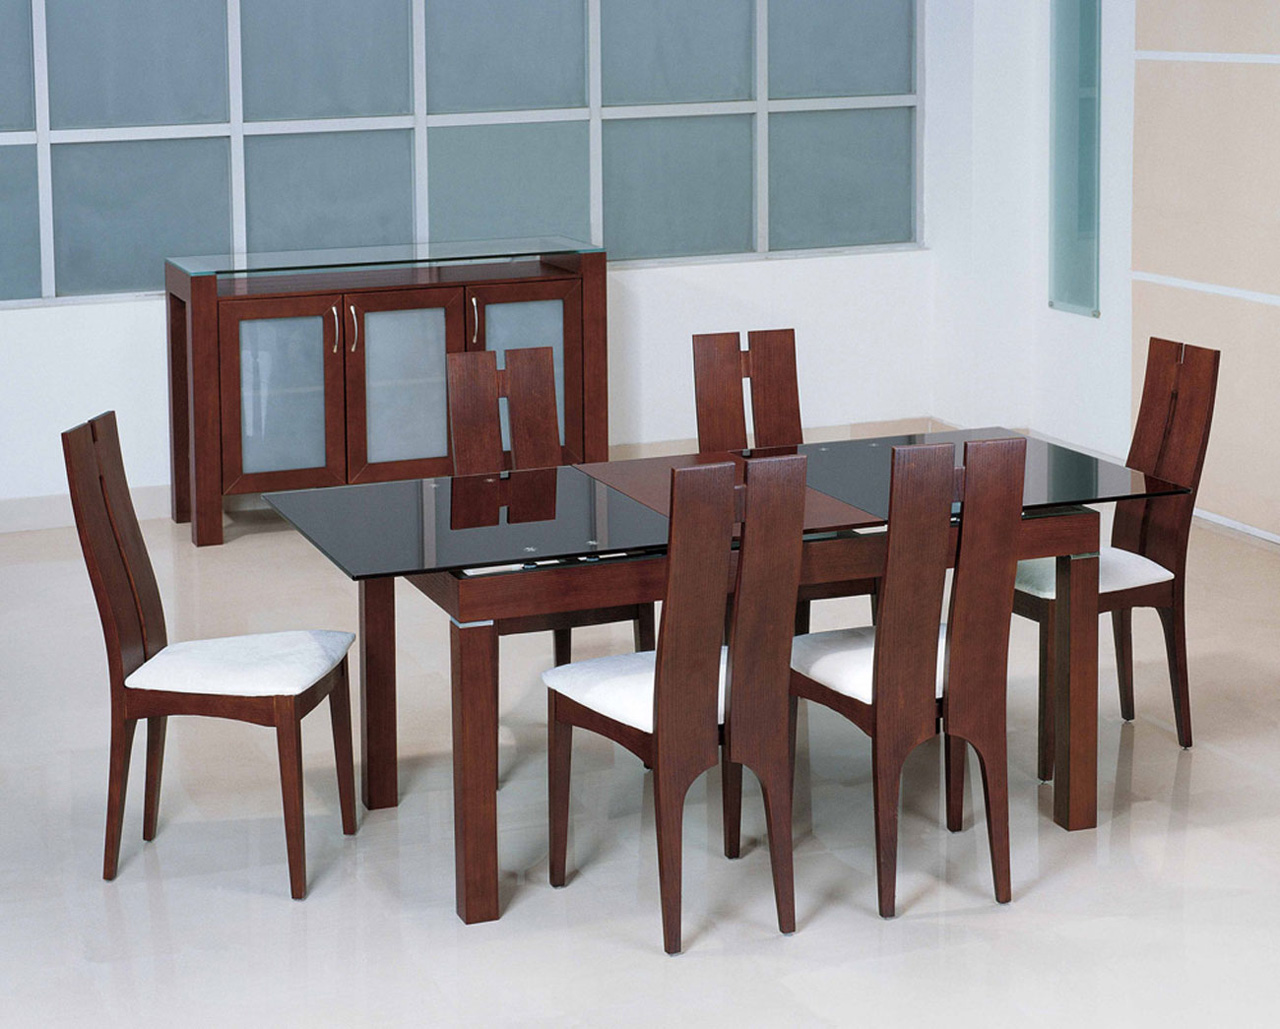 Black Glass Tables Natural Black Glass Dining Room Tables With Six Chairs Design Ideas Also Creative Ladder Back Chairs With Wood Seats Dining Room Tables Design Also Wooden Cabinet For Small Space Dining Room Choosing The Right Dining Room Tables